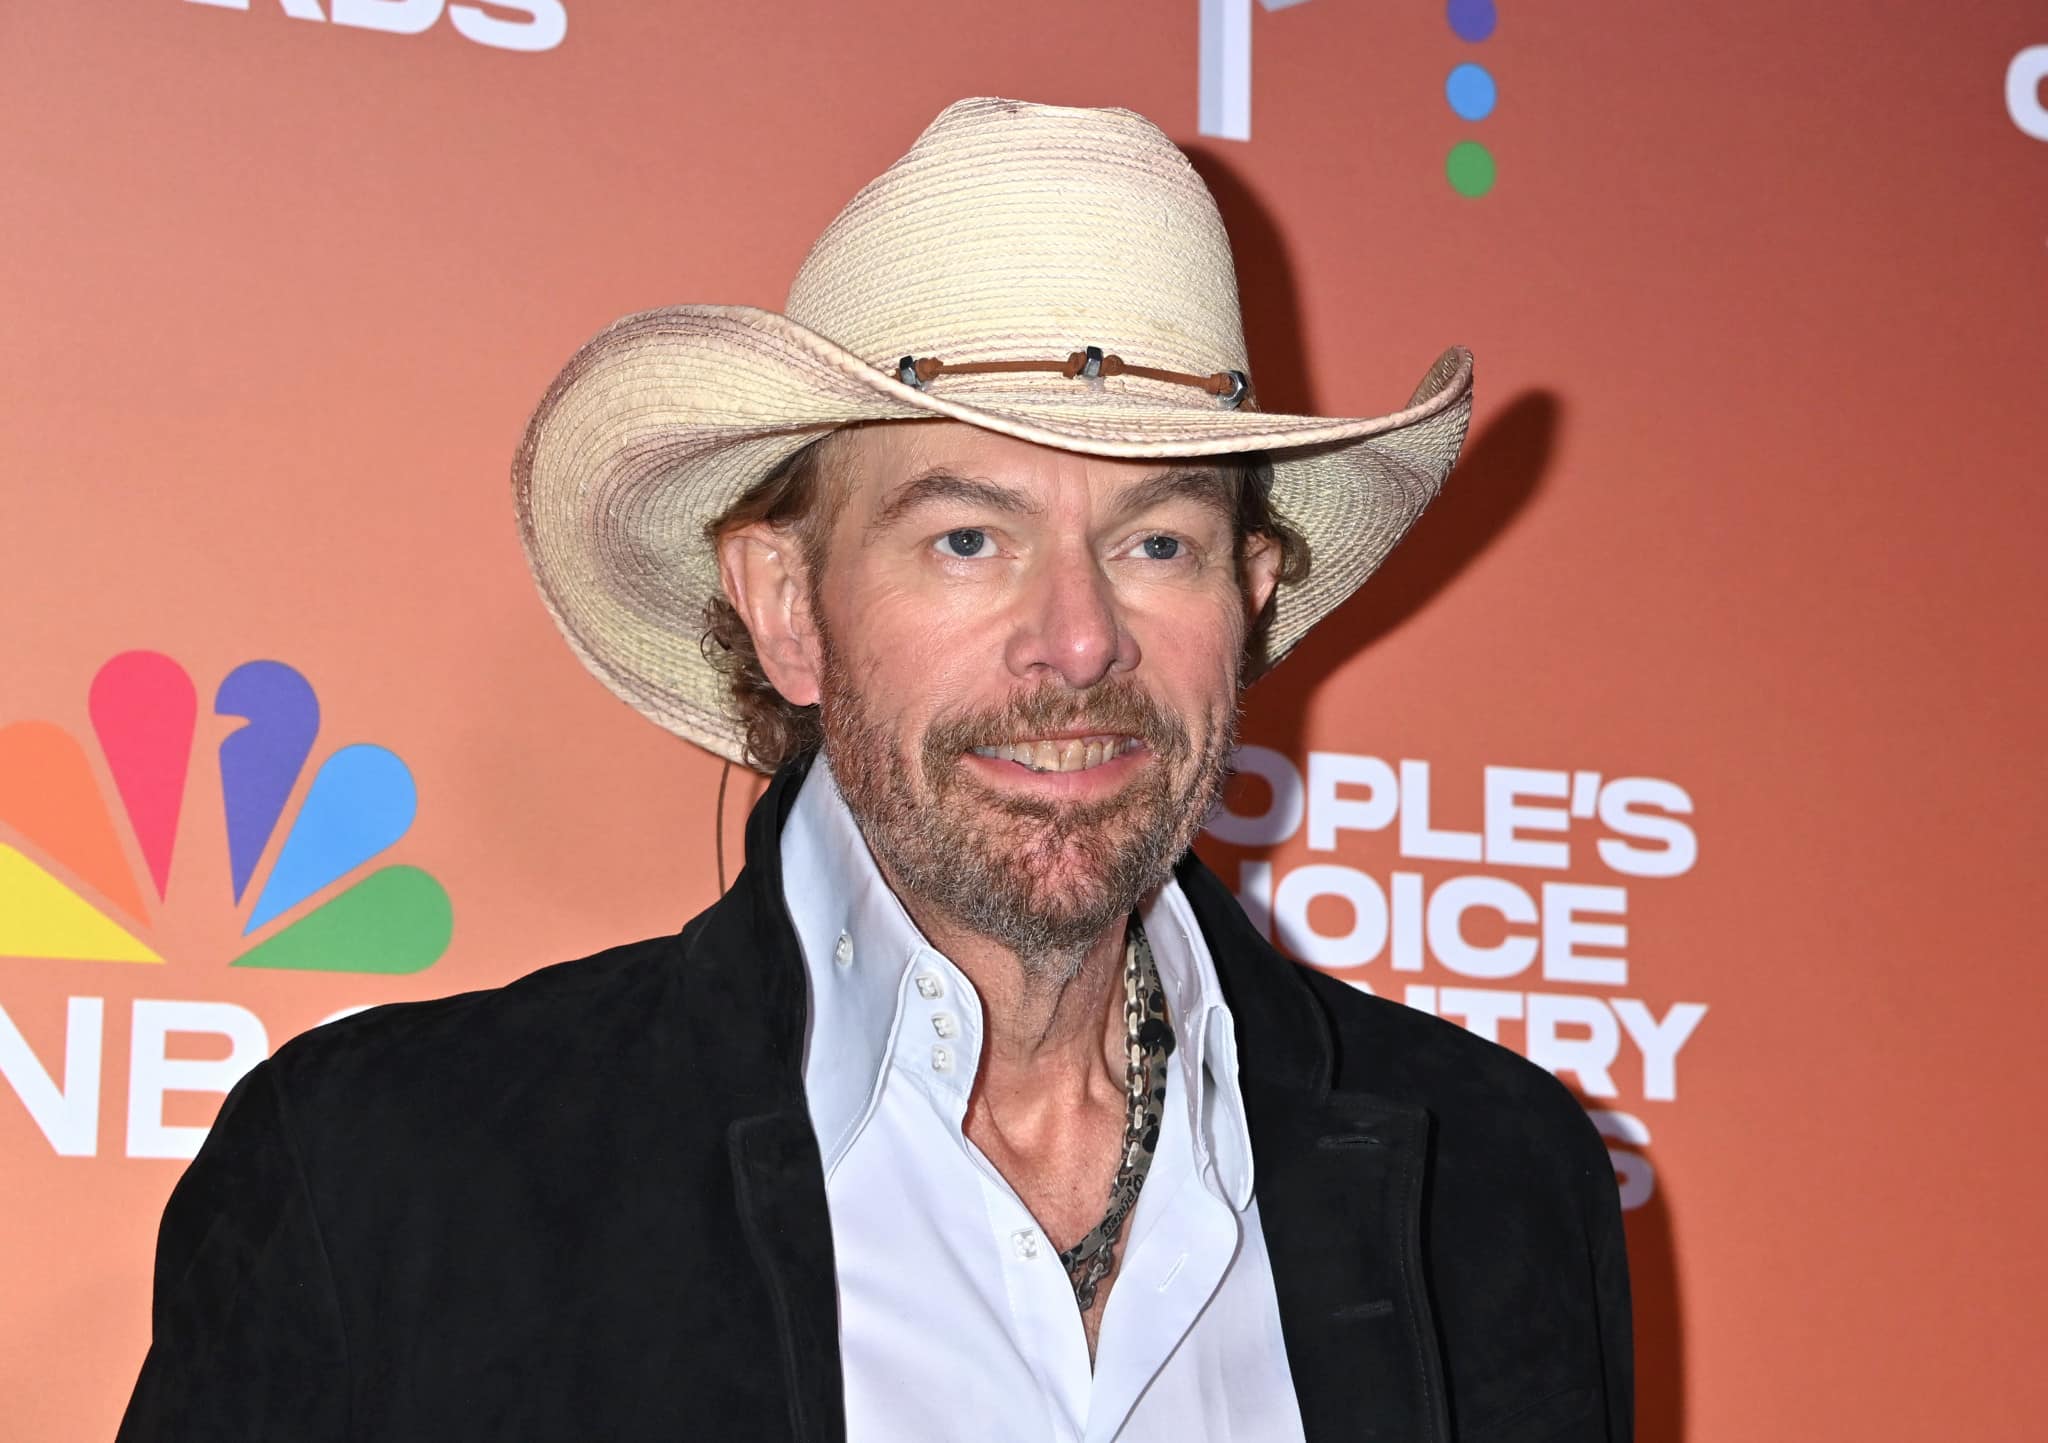 Toby Keith at the 2023 People's Choice Country Awards held at The Grand Ole Opry House on September 28, 2023 in Nashville, Tennessee. (Photo by Tammie Arroyo/Variety via Getty Images)